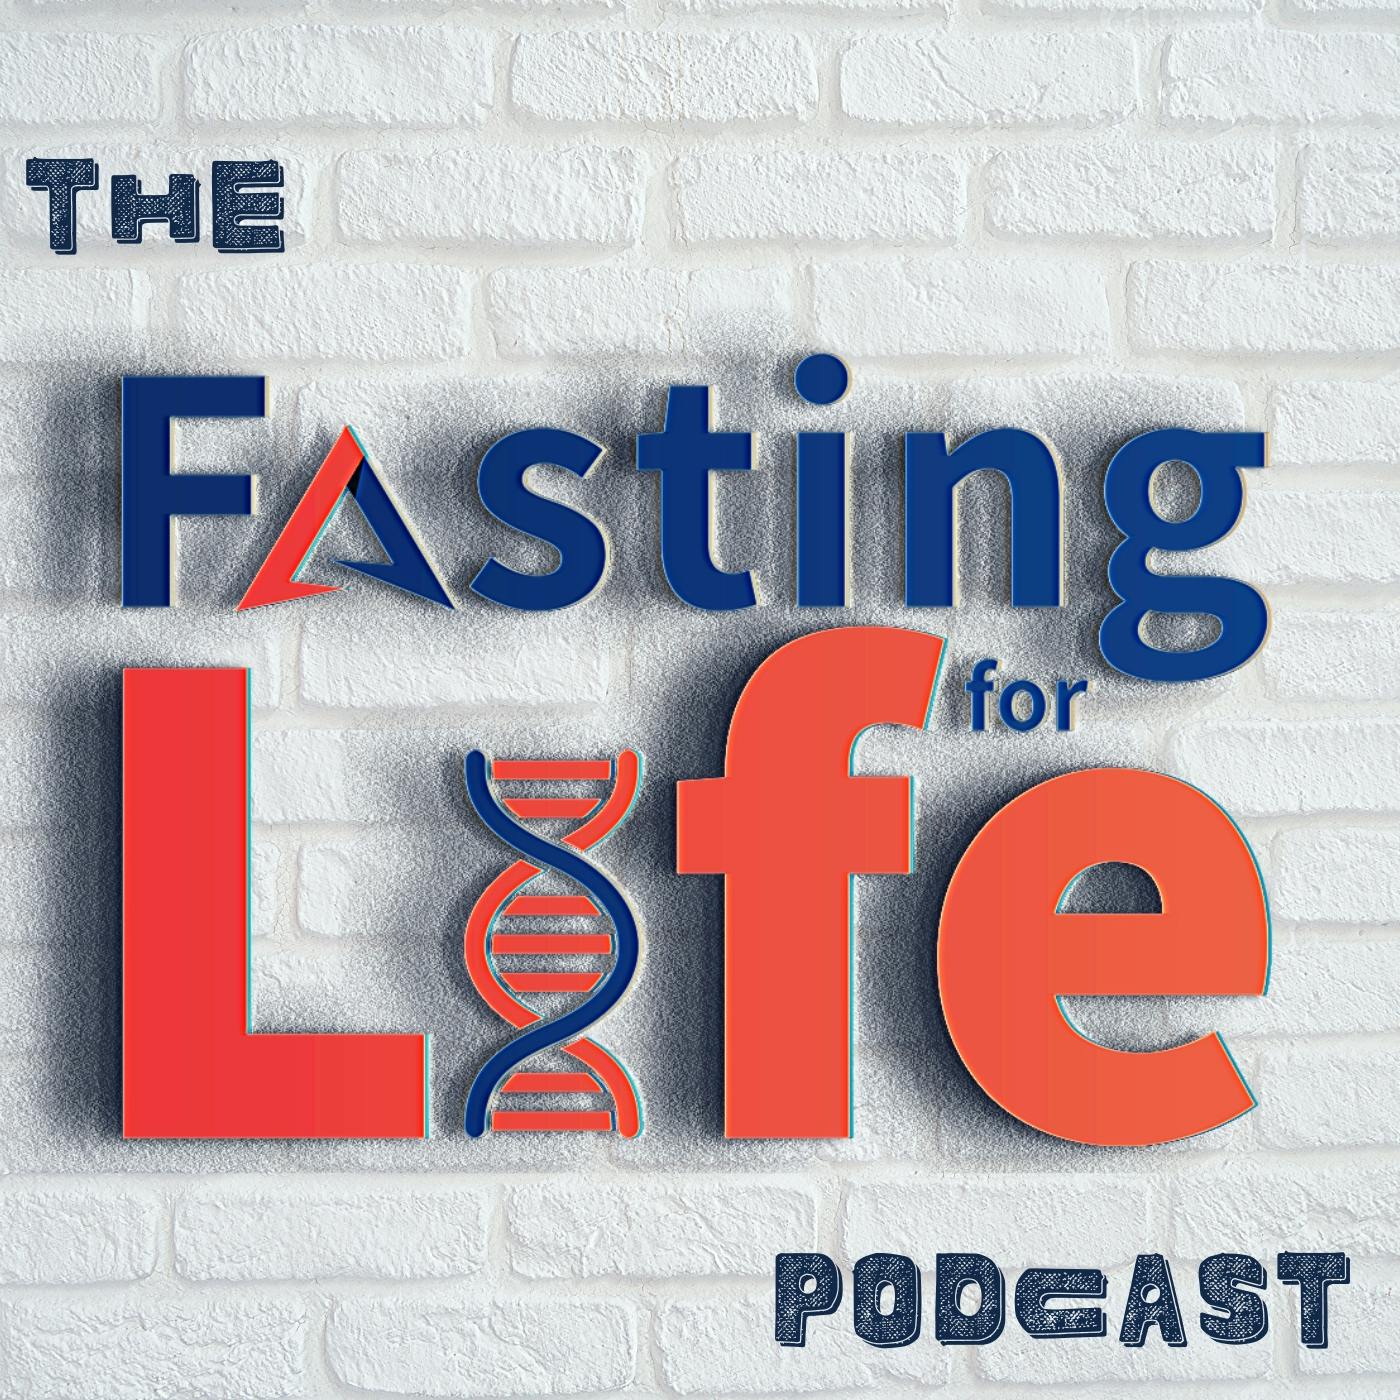 Ep. 183 -  Why predicting metabolic rate change is difficult during weight loss | Calories, macros, BMR, & TDEE vs. intuitive fasting | Fasting benefits, boosting growth hormone, & improving insulin s